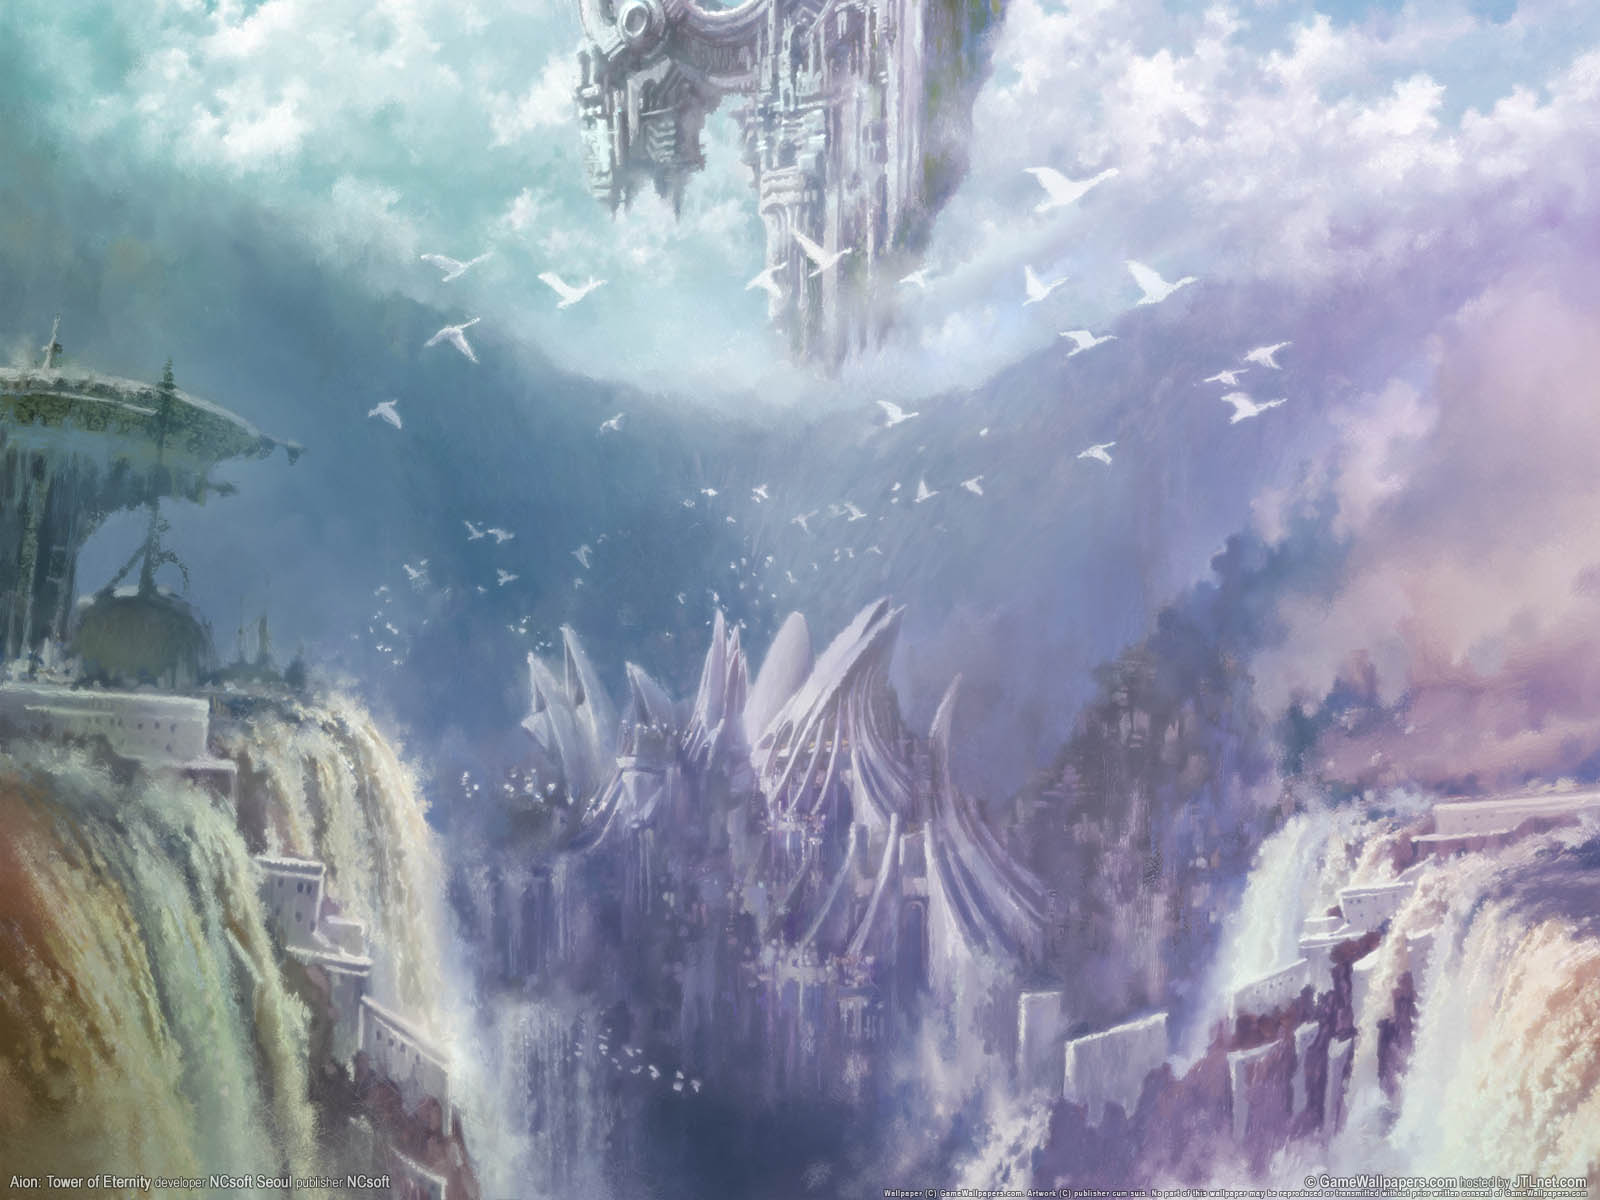 Aion%25253A Tower of Eternity achtergrond 07 1600x1200